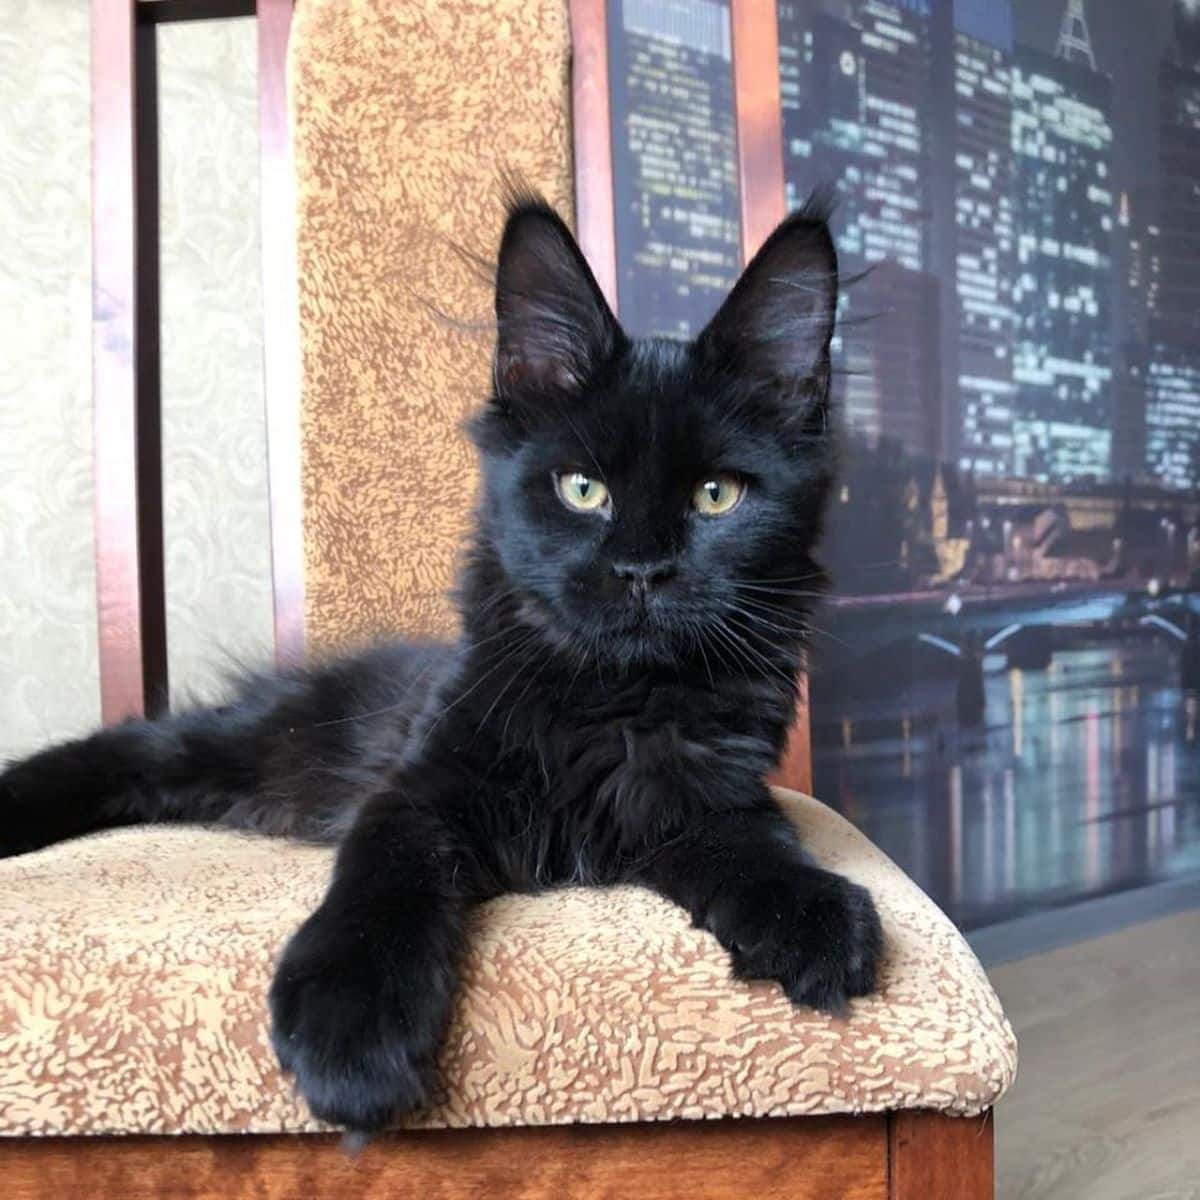 An adorable black maine coon kitten lying on a chair.